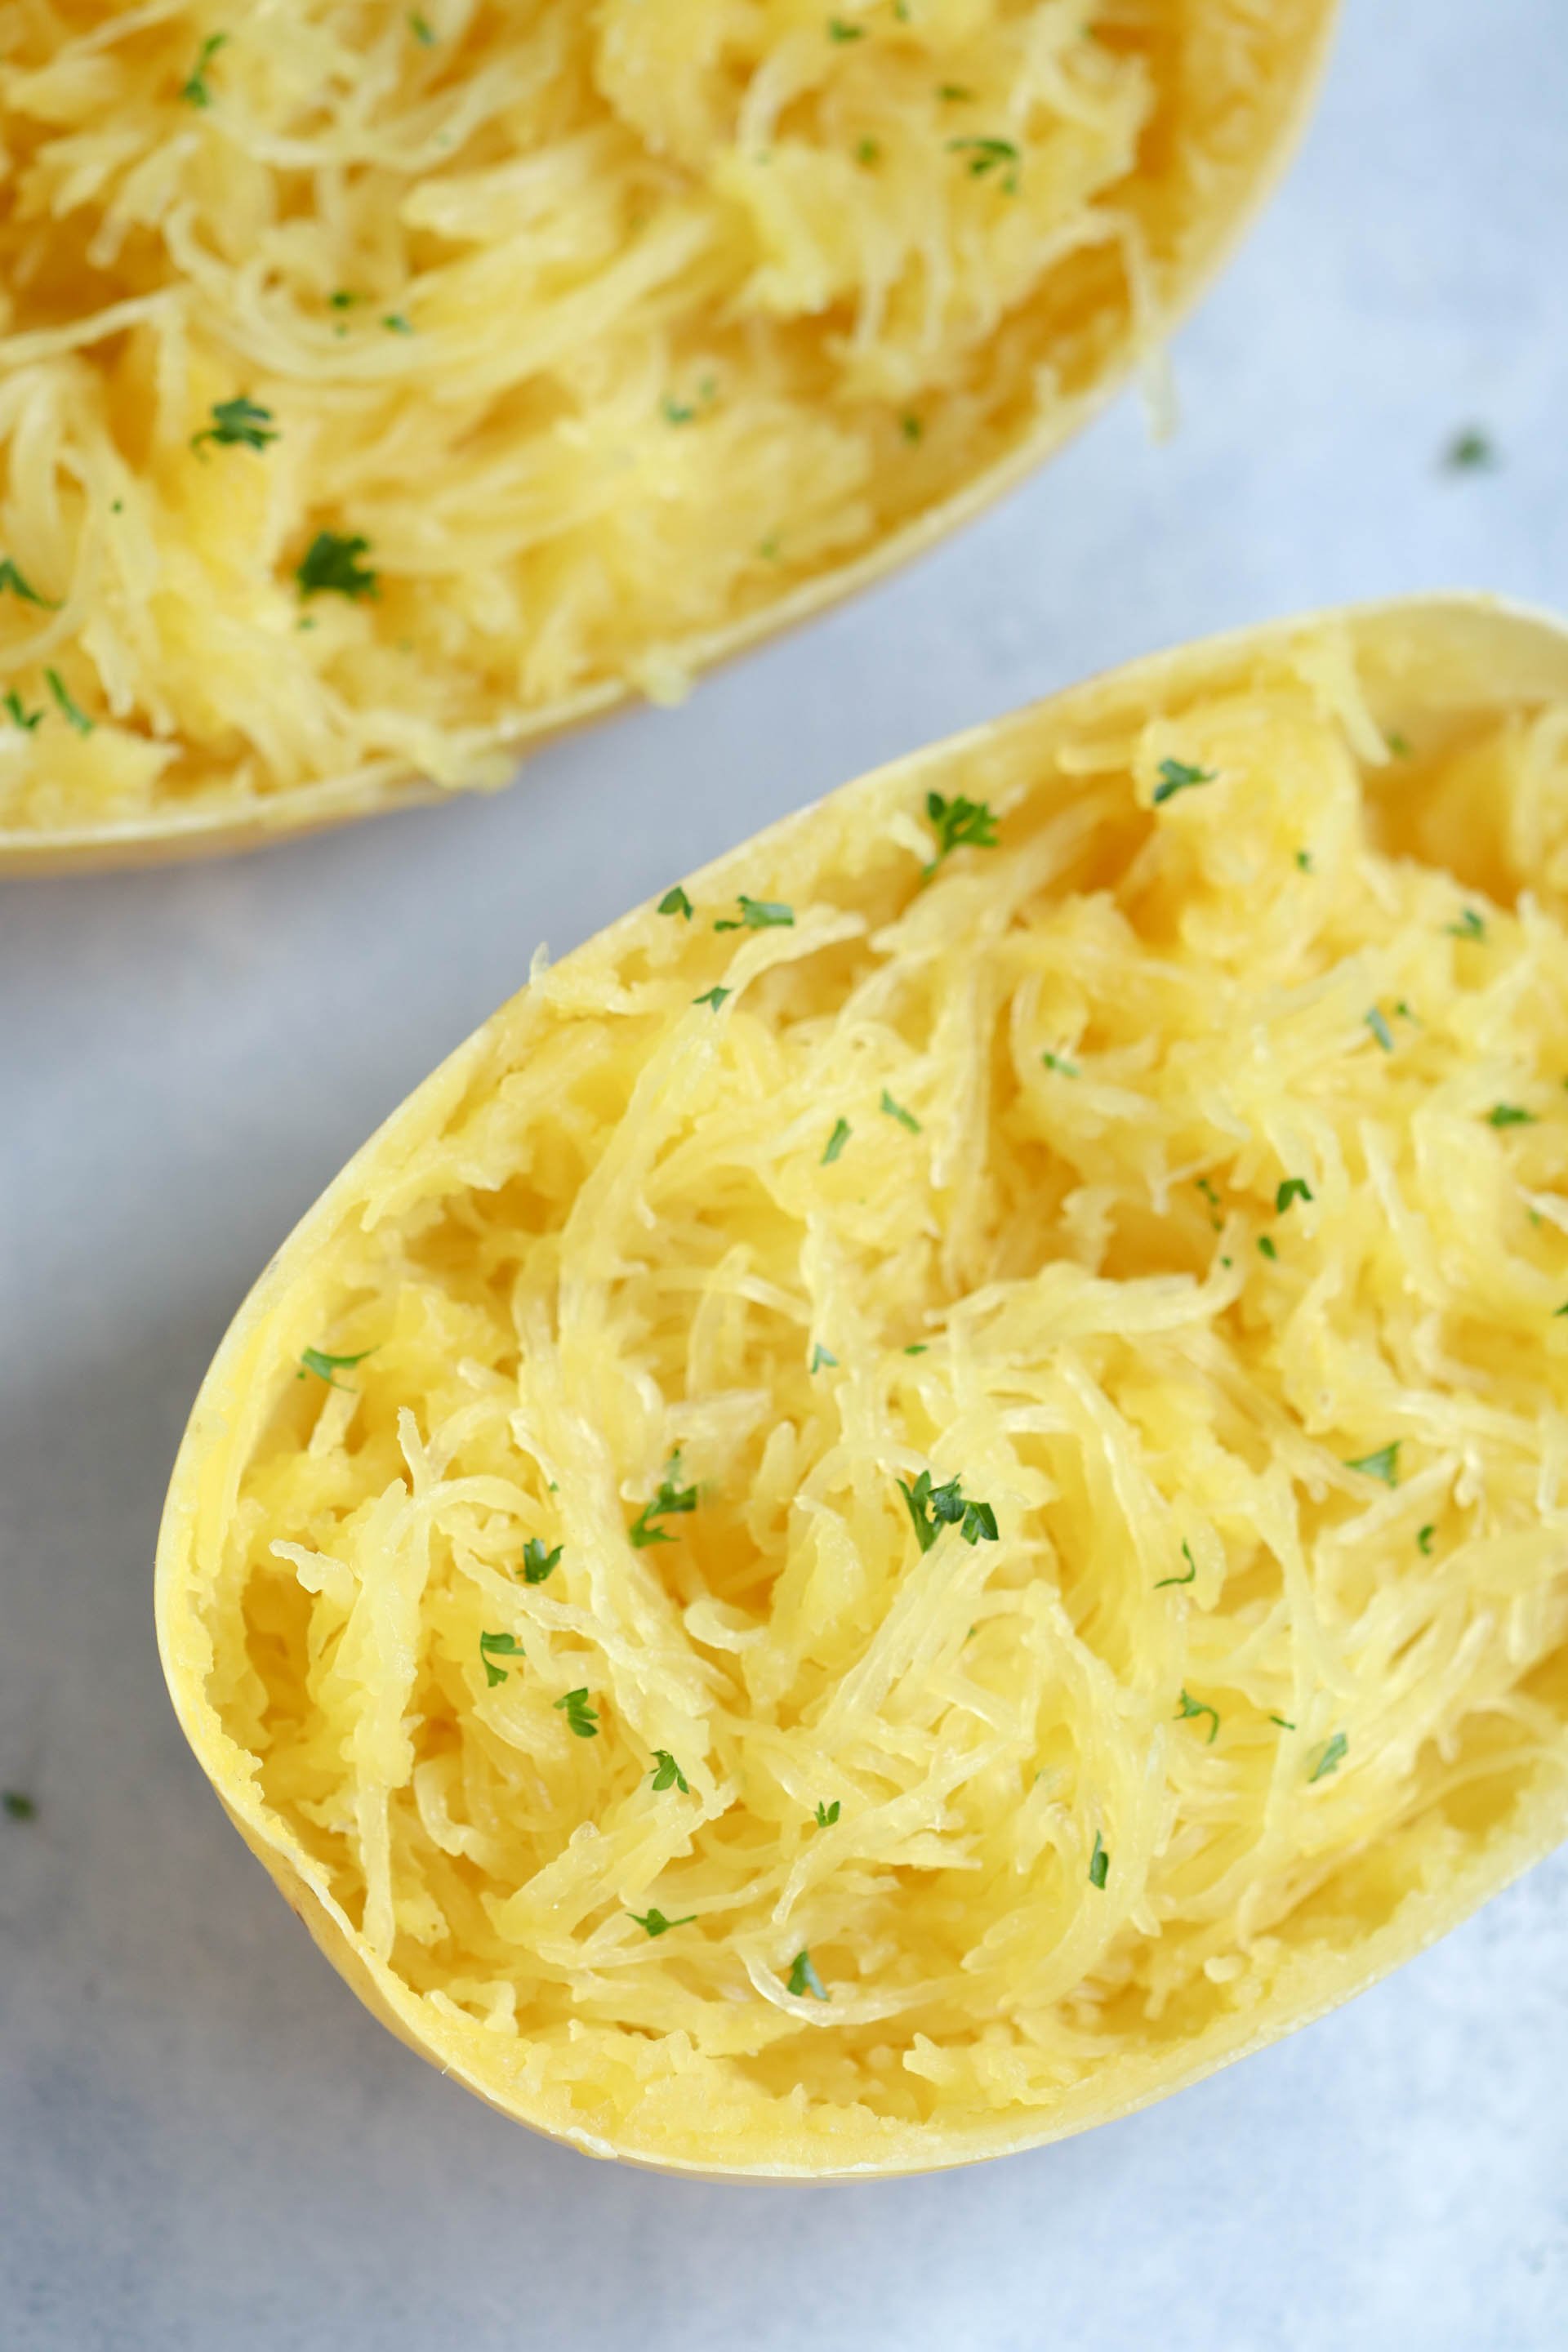 2 Spaghetti Squash halves filled with cooked and shredded spaghetti squash